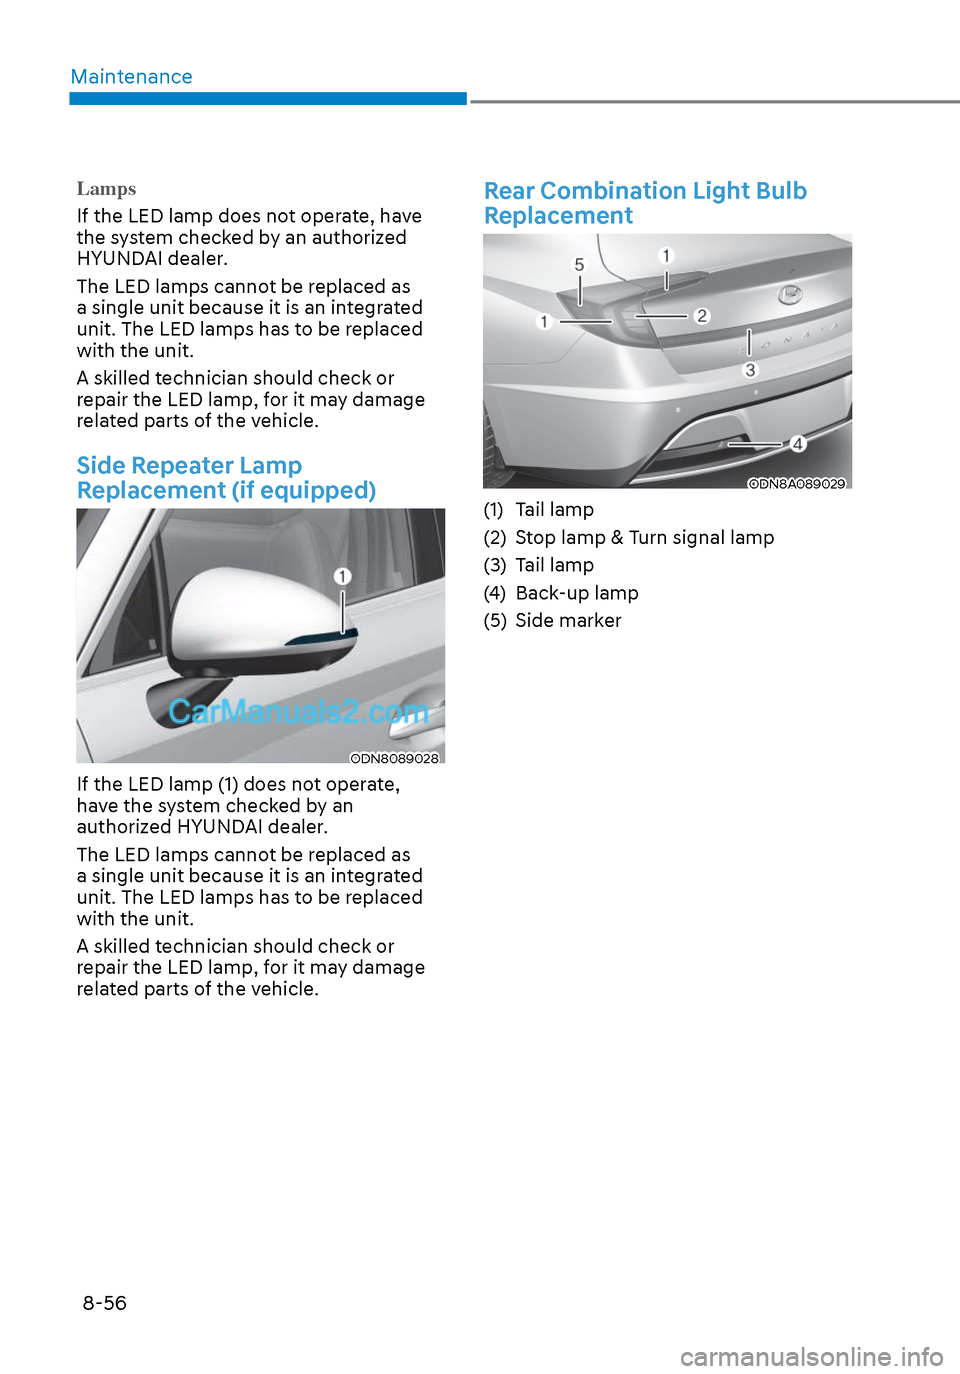 Hyundai Sonata 2020  Owners Manual Maintenance8-56
Lamps
If the LED lamp does not operate, have 
the s
 ystem checked by an authorized 
HYUNDAI dealer.
The LED lamps cannot be replaced as 
a single unit because it is an integrated 
uni